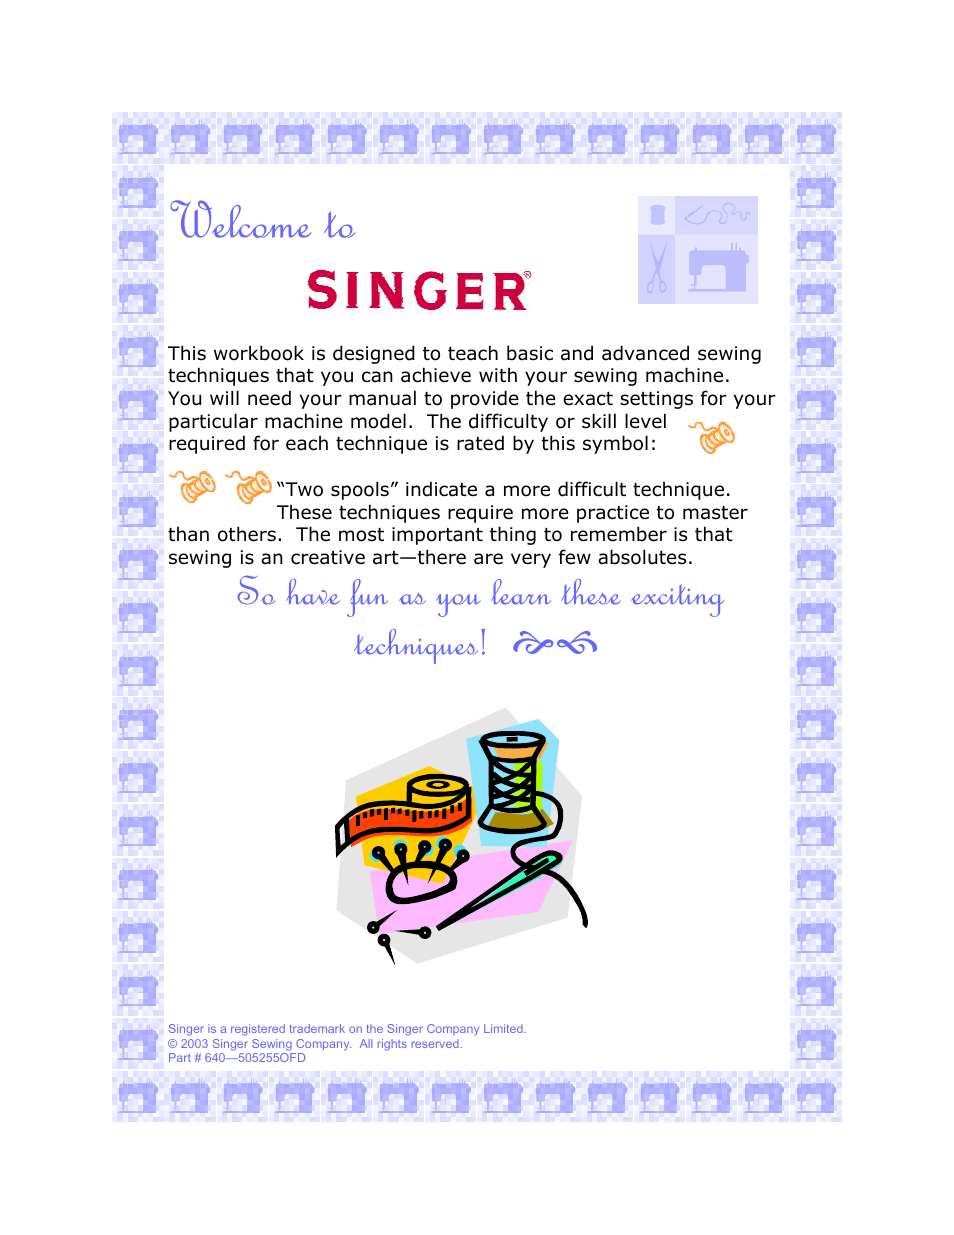 Welcome to, So have fun as you learn these exciting techniques | SINGER 6550-WORKBOOK Scholastic User Manual | Page 2 / 59